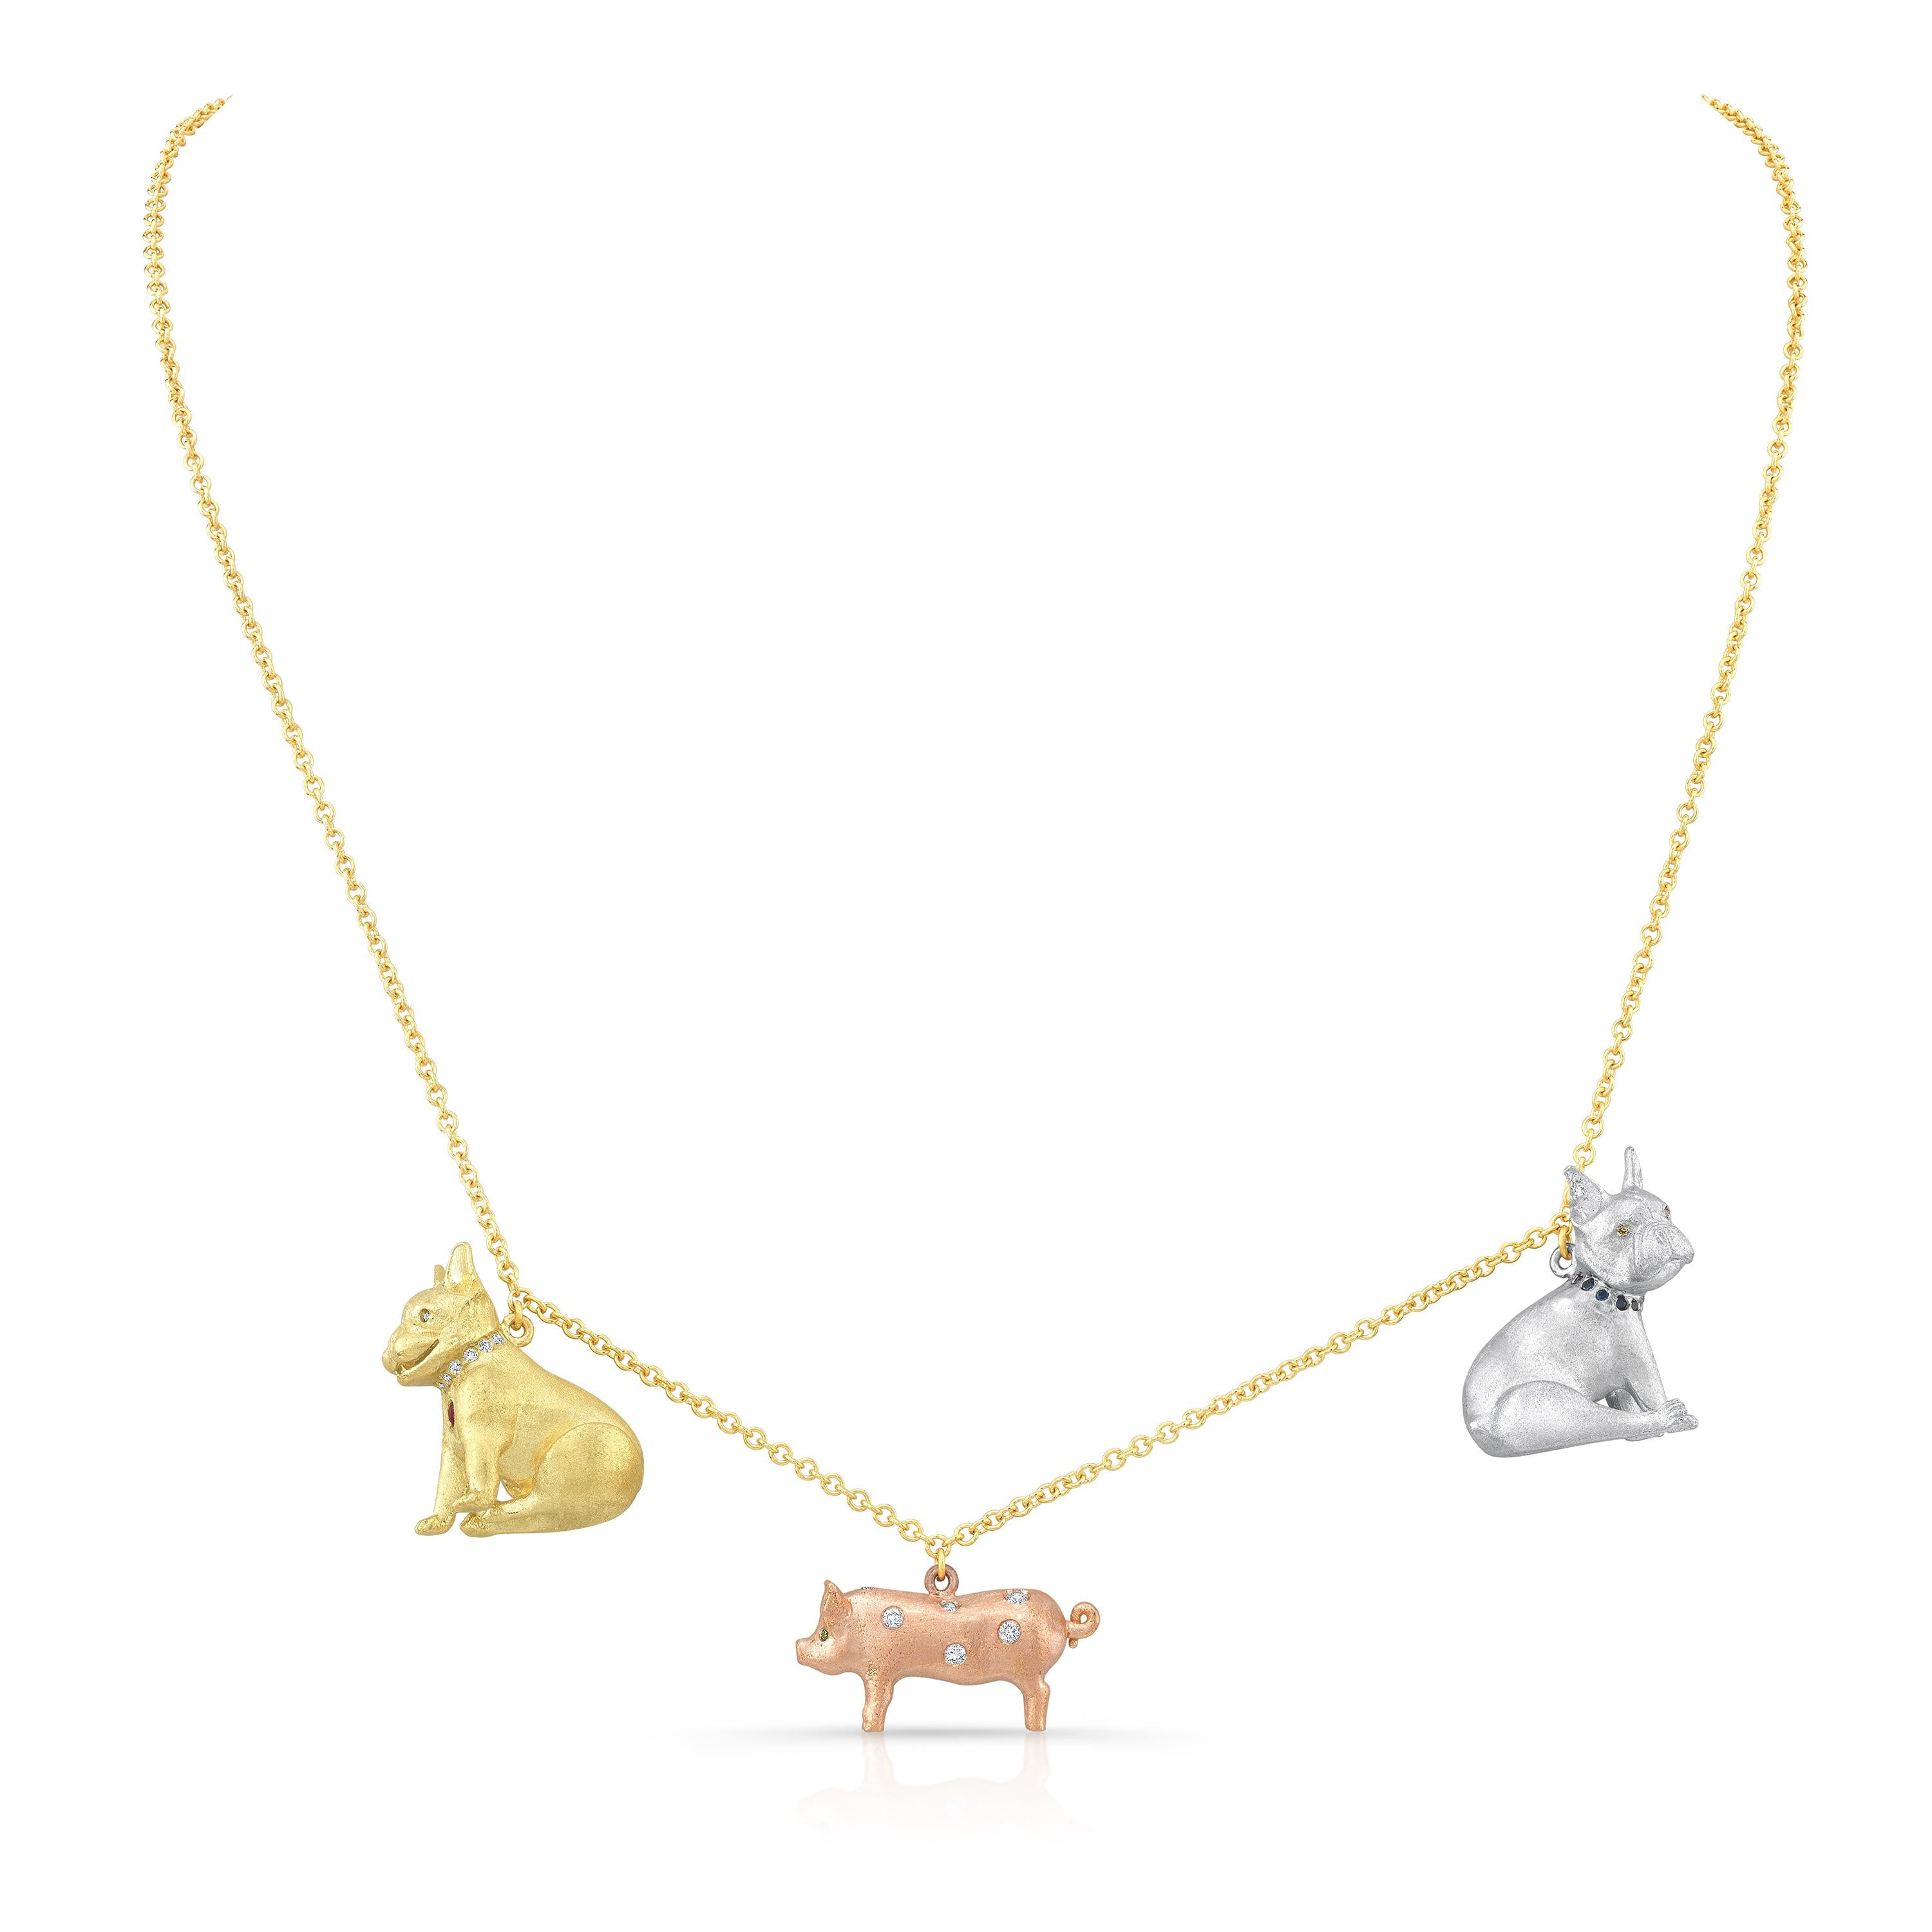 Amy Y's 18K-gold and diamond pendants from the animal kingdom are an animal lovers' dream come true.  Amy's love of animals and nature has always been a trademark of her unique and whimsical designs.  Handmade by Amy's skilled European artisans,